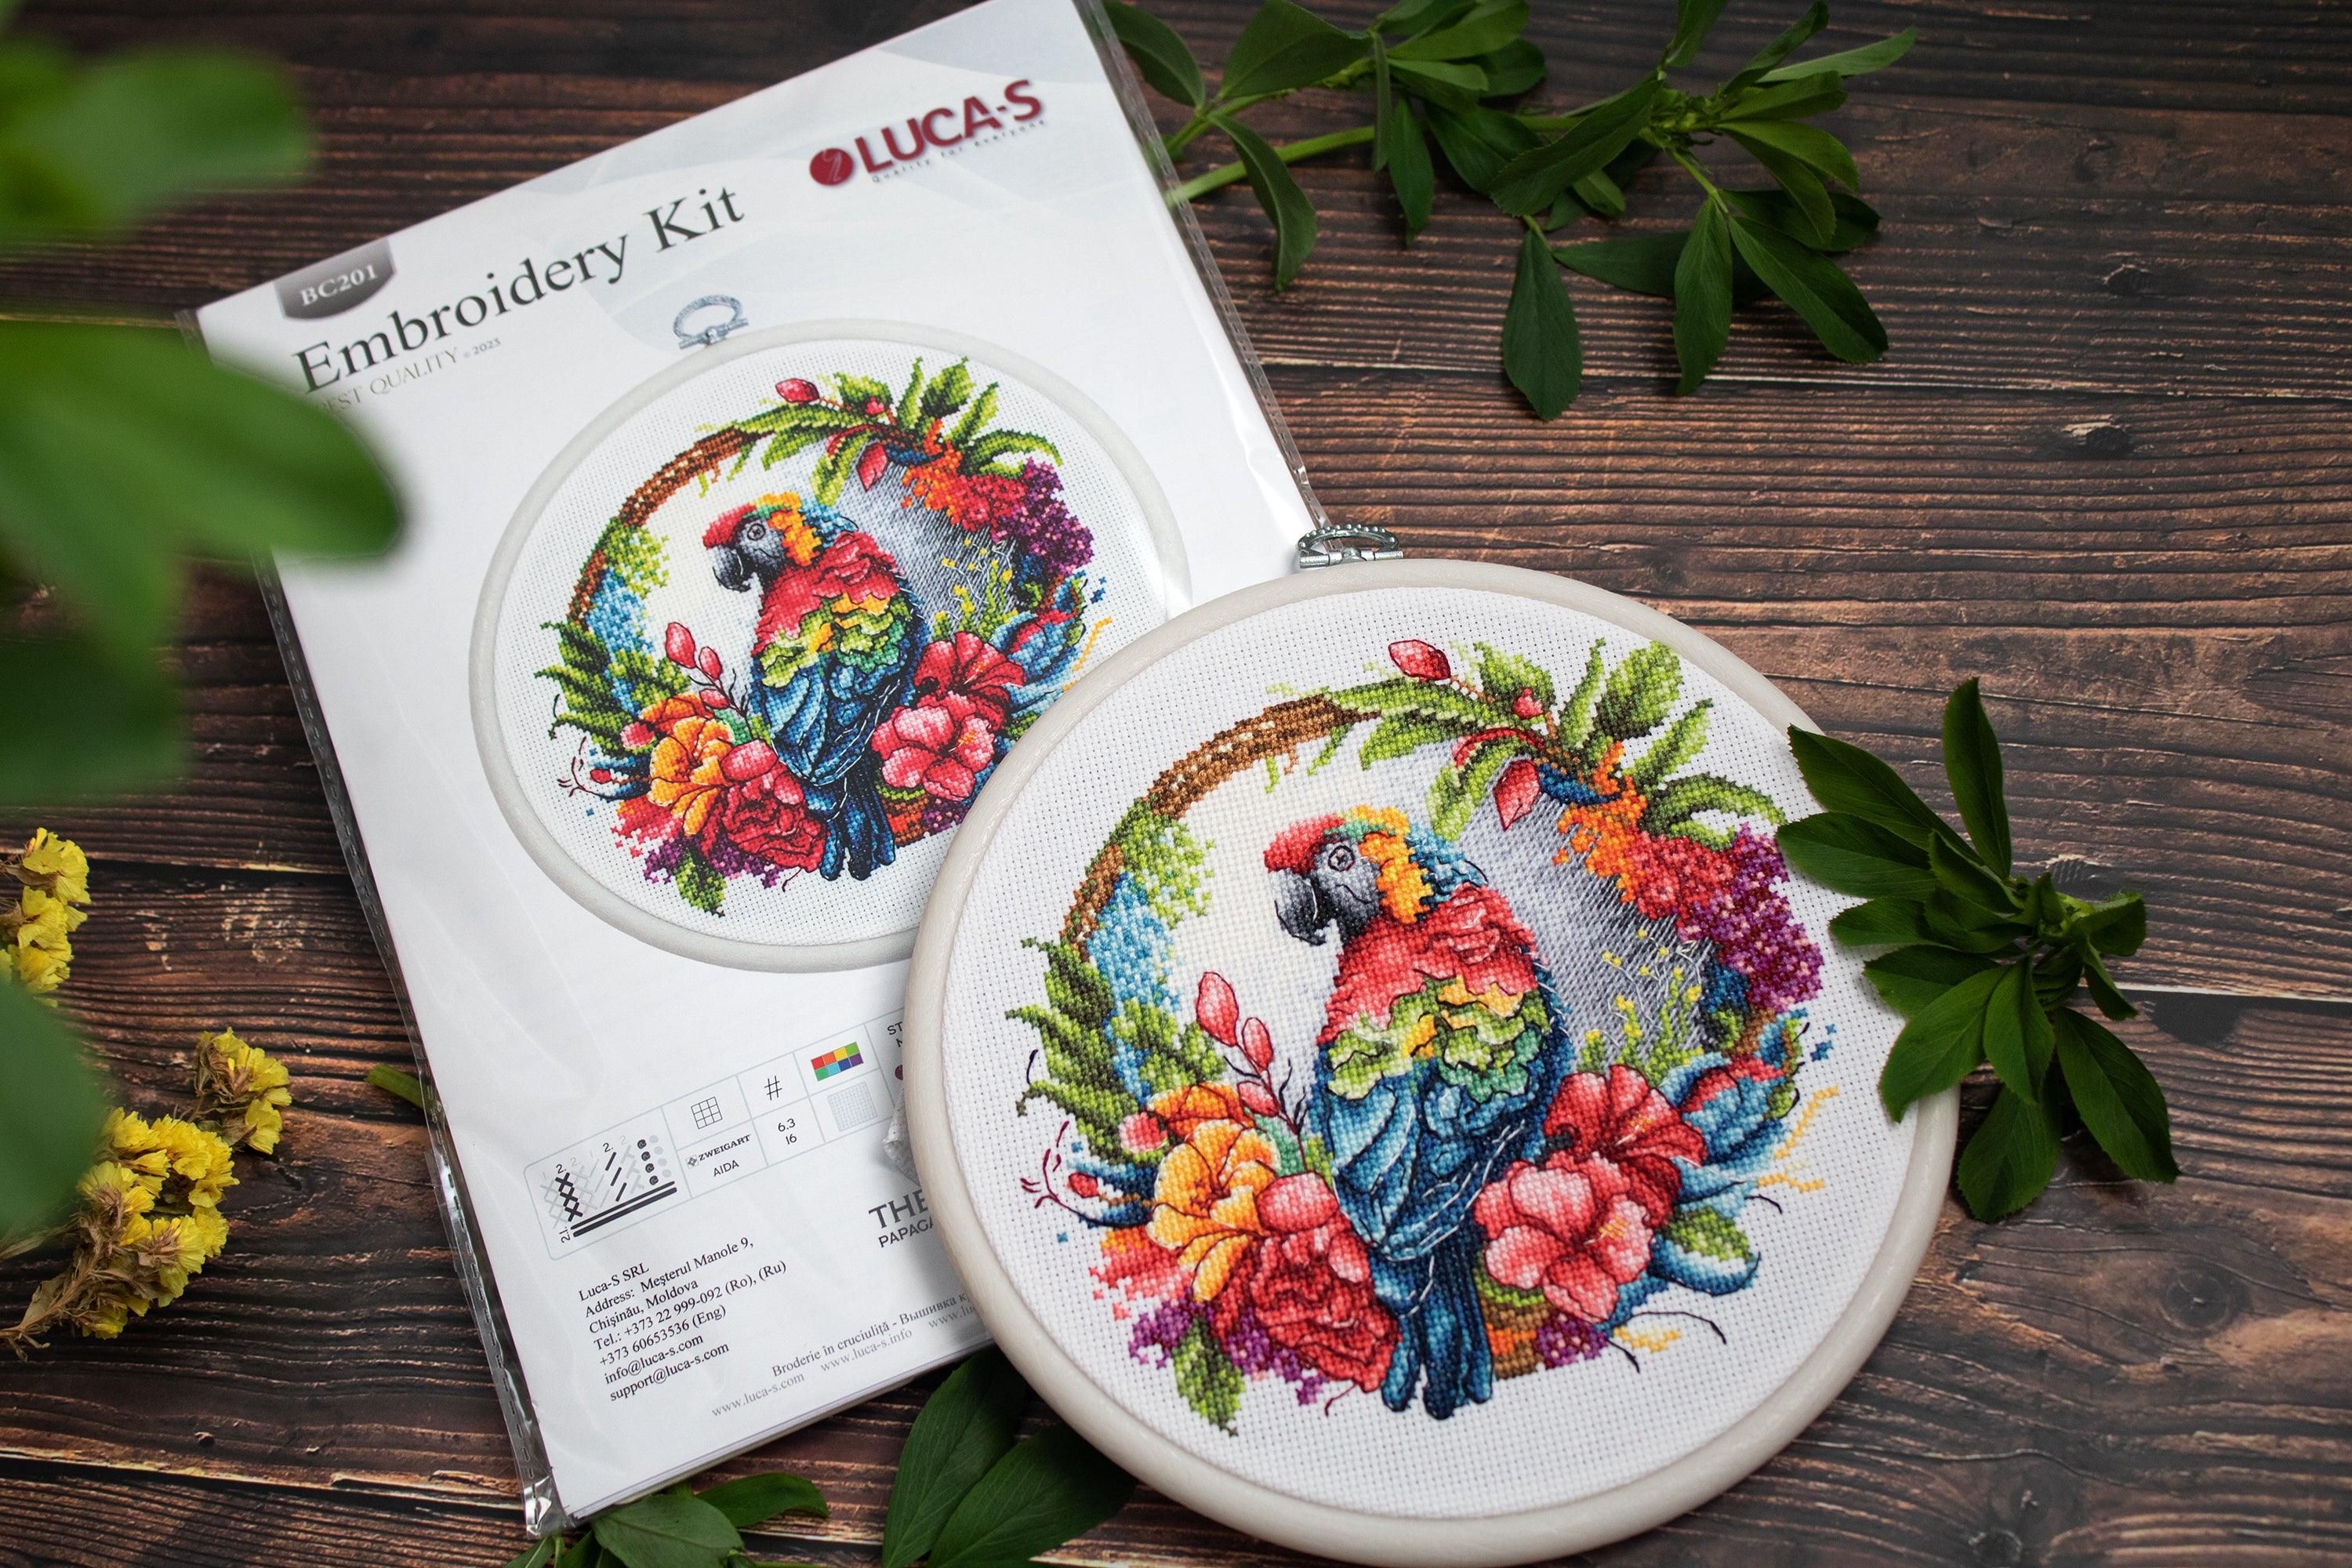 Cross Stitch Kit with Hoop Included Luca-S - The Tropical Parrot, BC201 - Luca-S Cross Stitch Kits